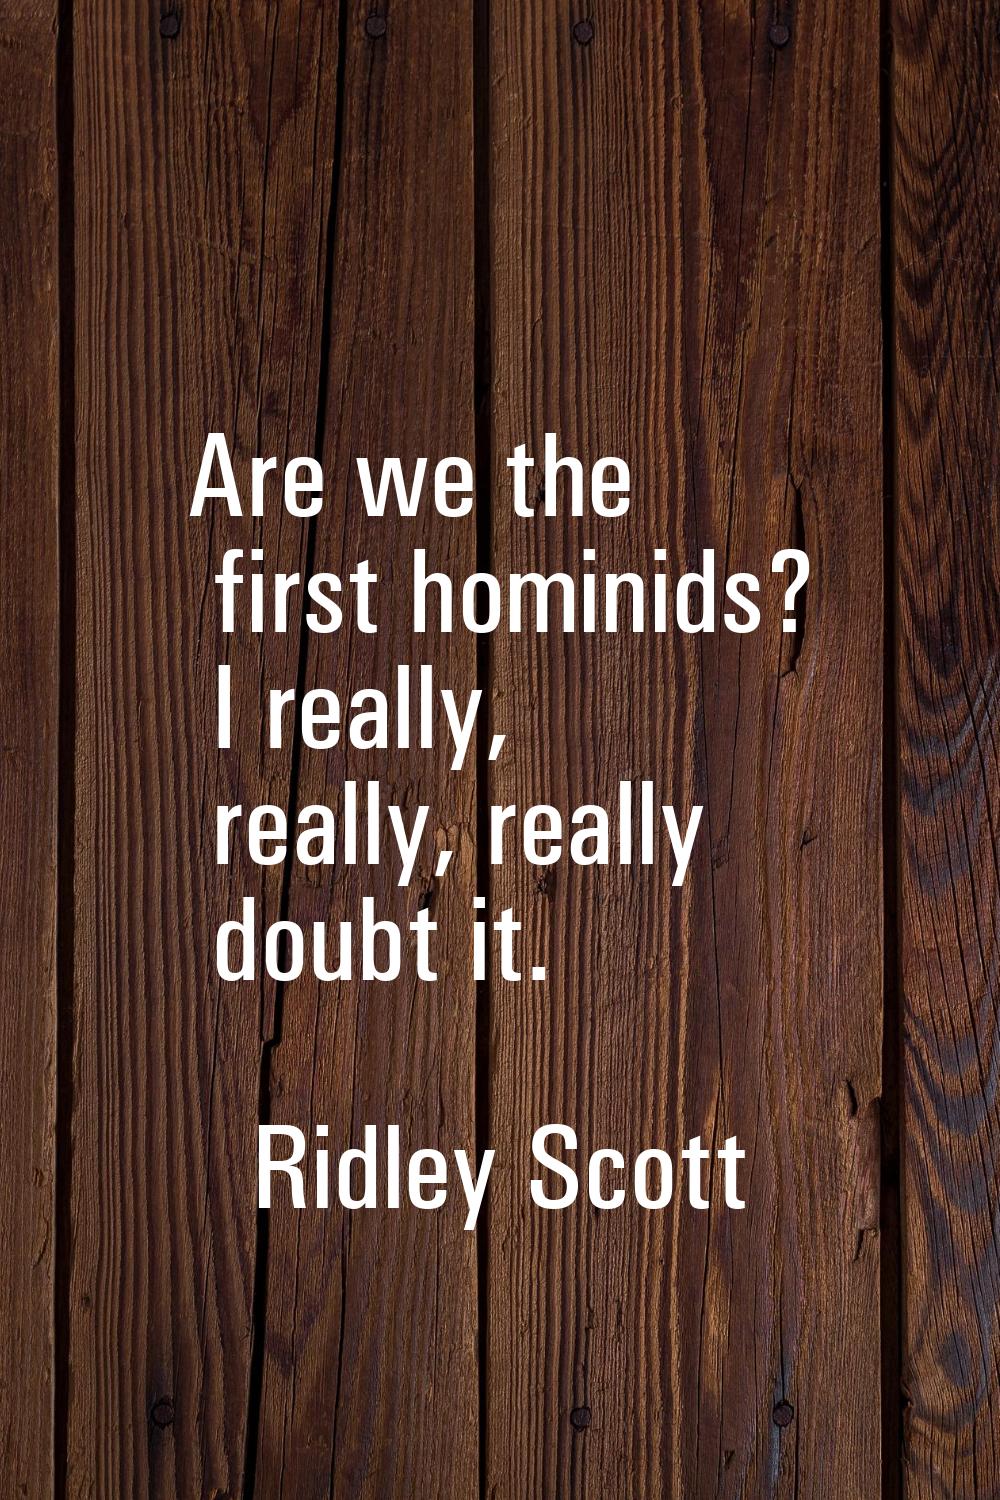 Are we the first hominids? I really, really, really doubt it.